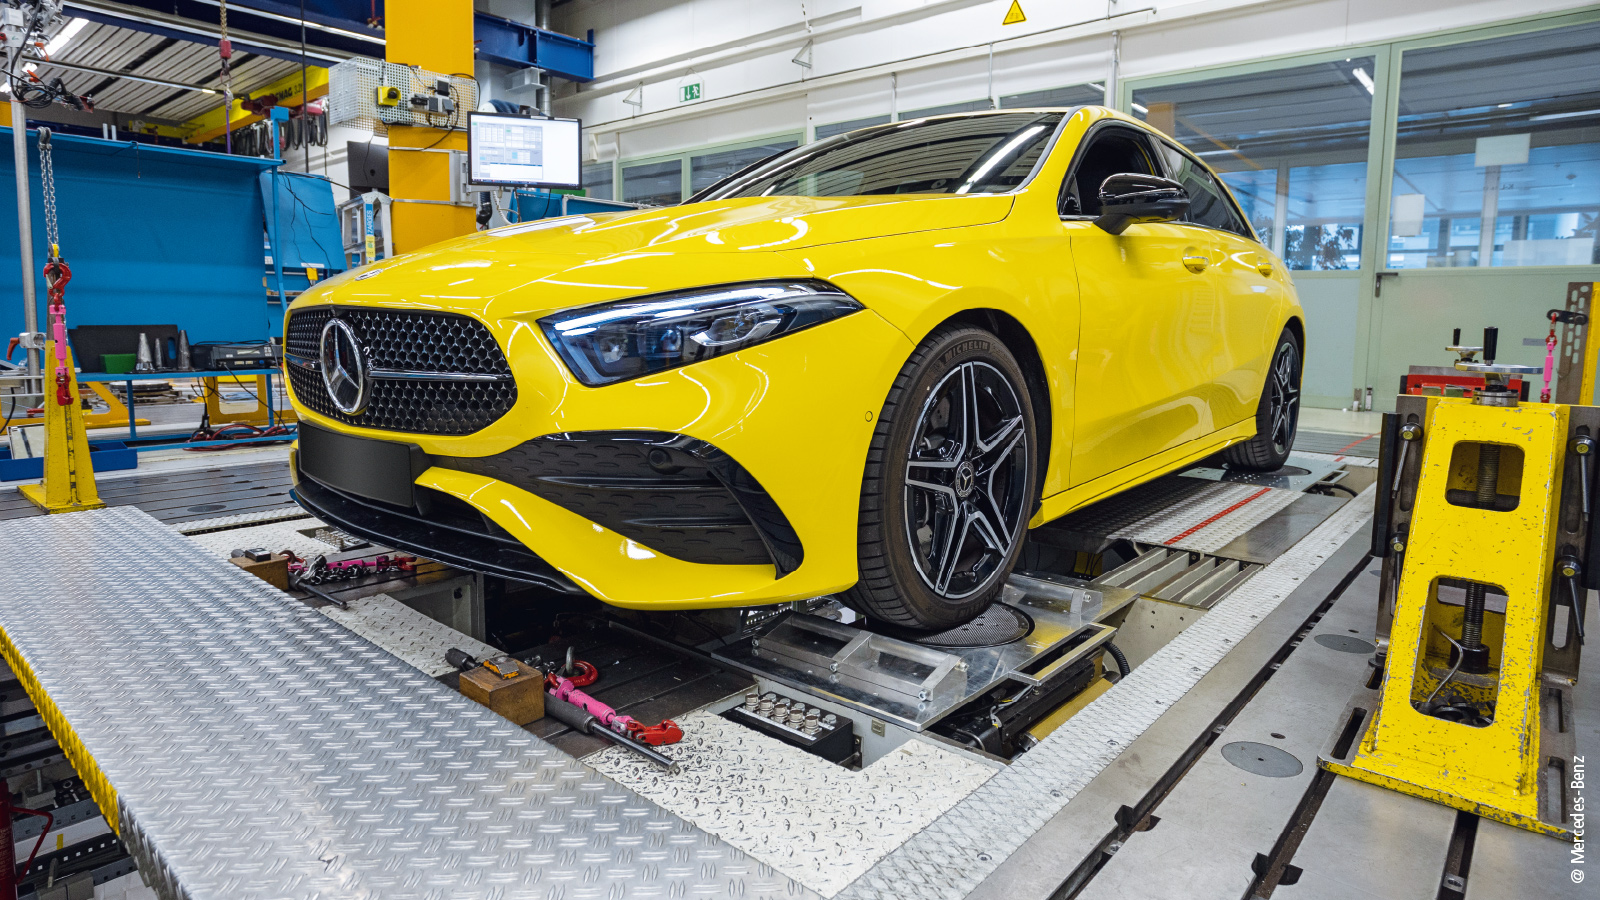 Mercedes-Benz uses ELM-series precision measurement terminals and TwinCAT software to analyze and optimize the driving dynamics properties of future vehicle generations on several test benches.